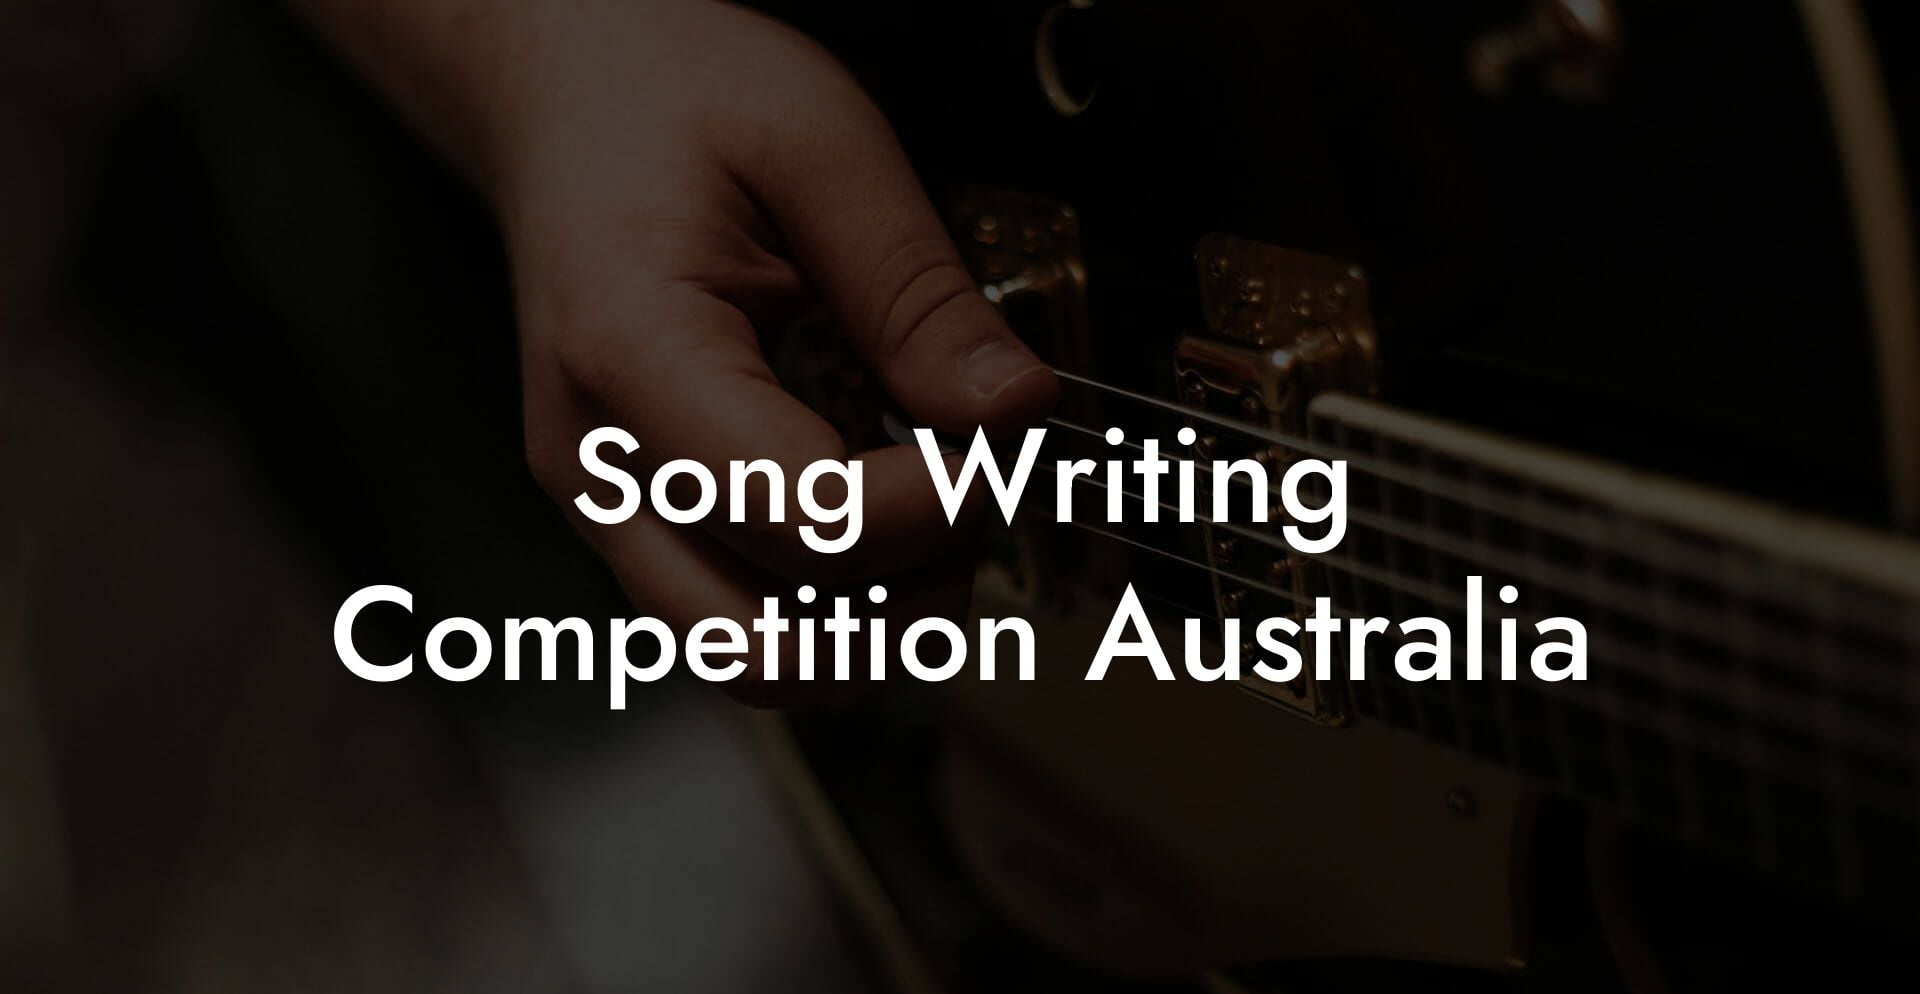 song writing competition australia lyric assistant